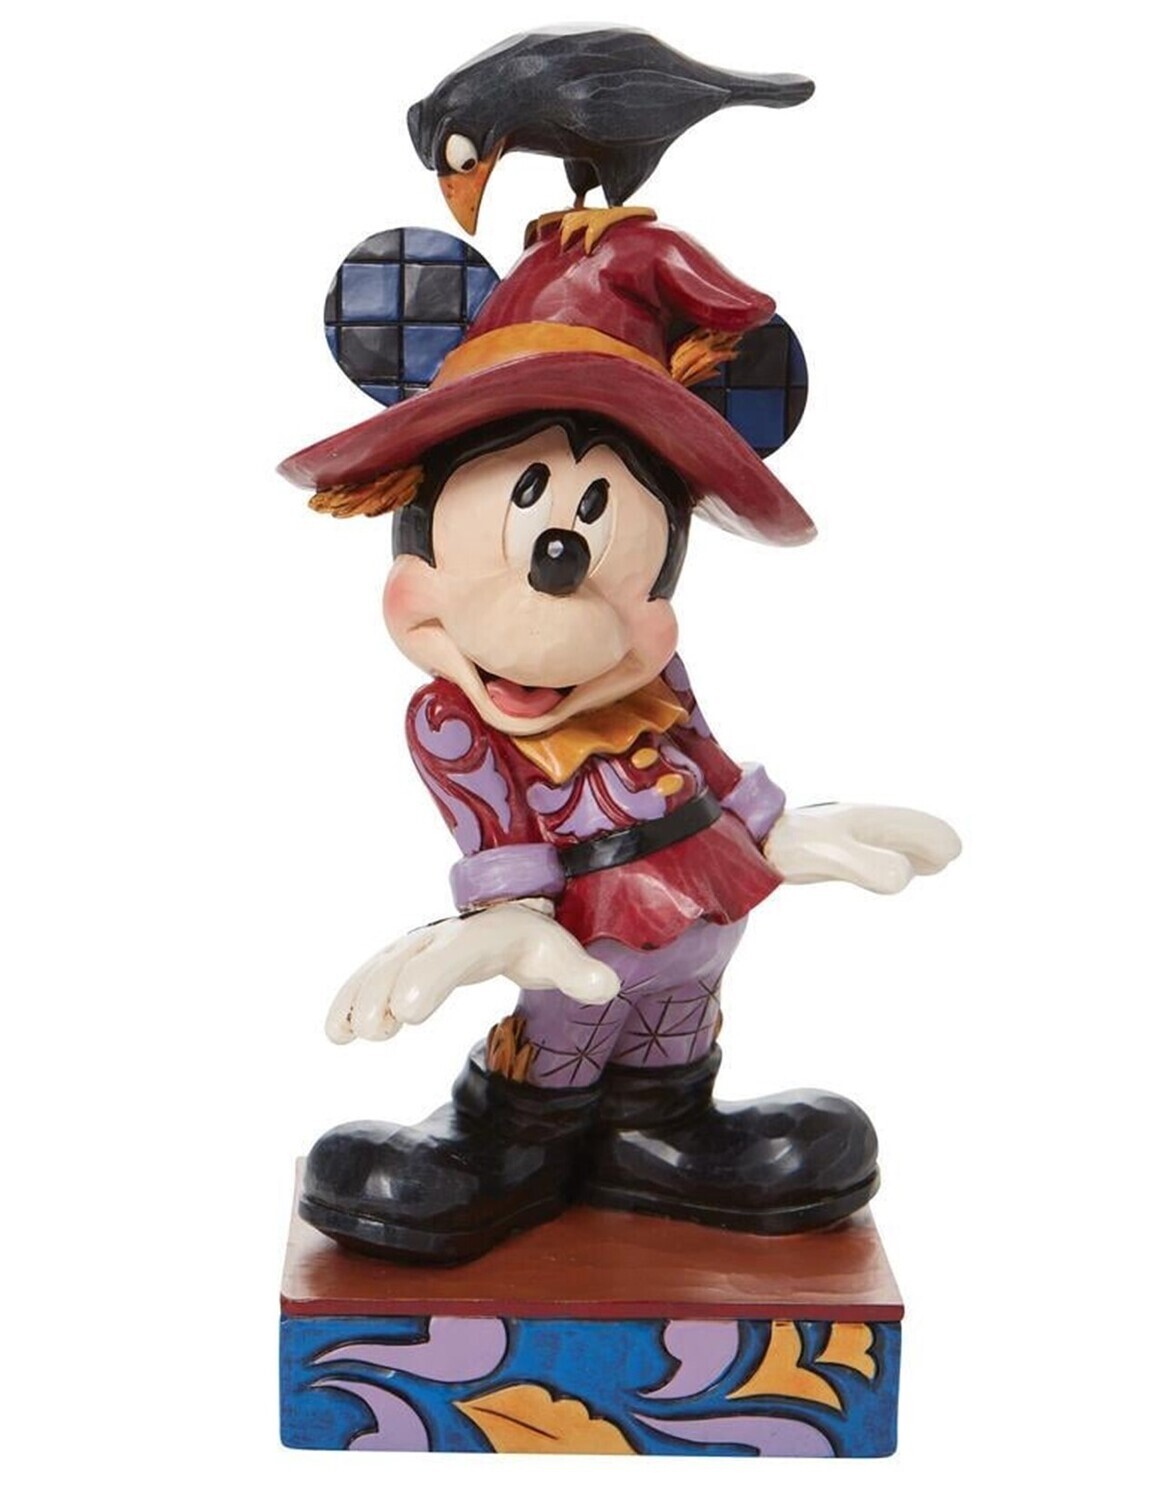 Jim Shore Disney Traditions "Scaredy Crow" Mickey Mouse Fall Figurine (6010862)